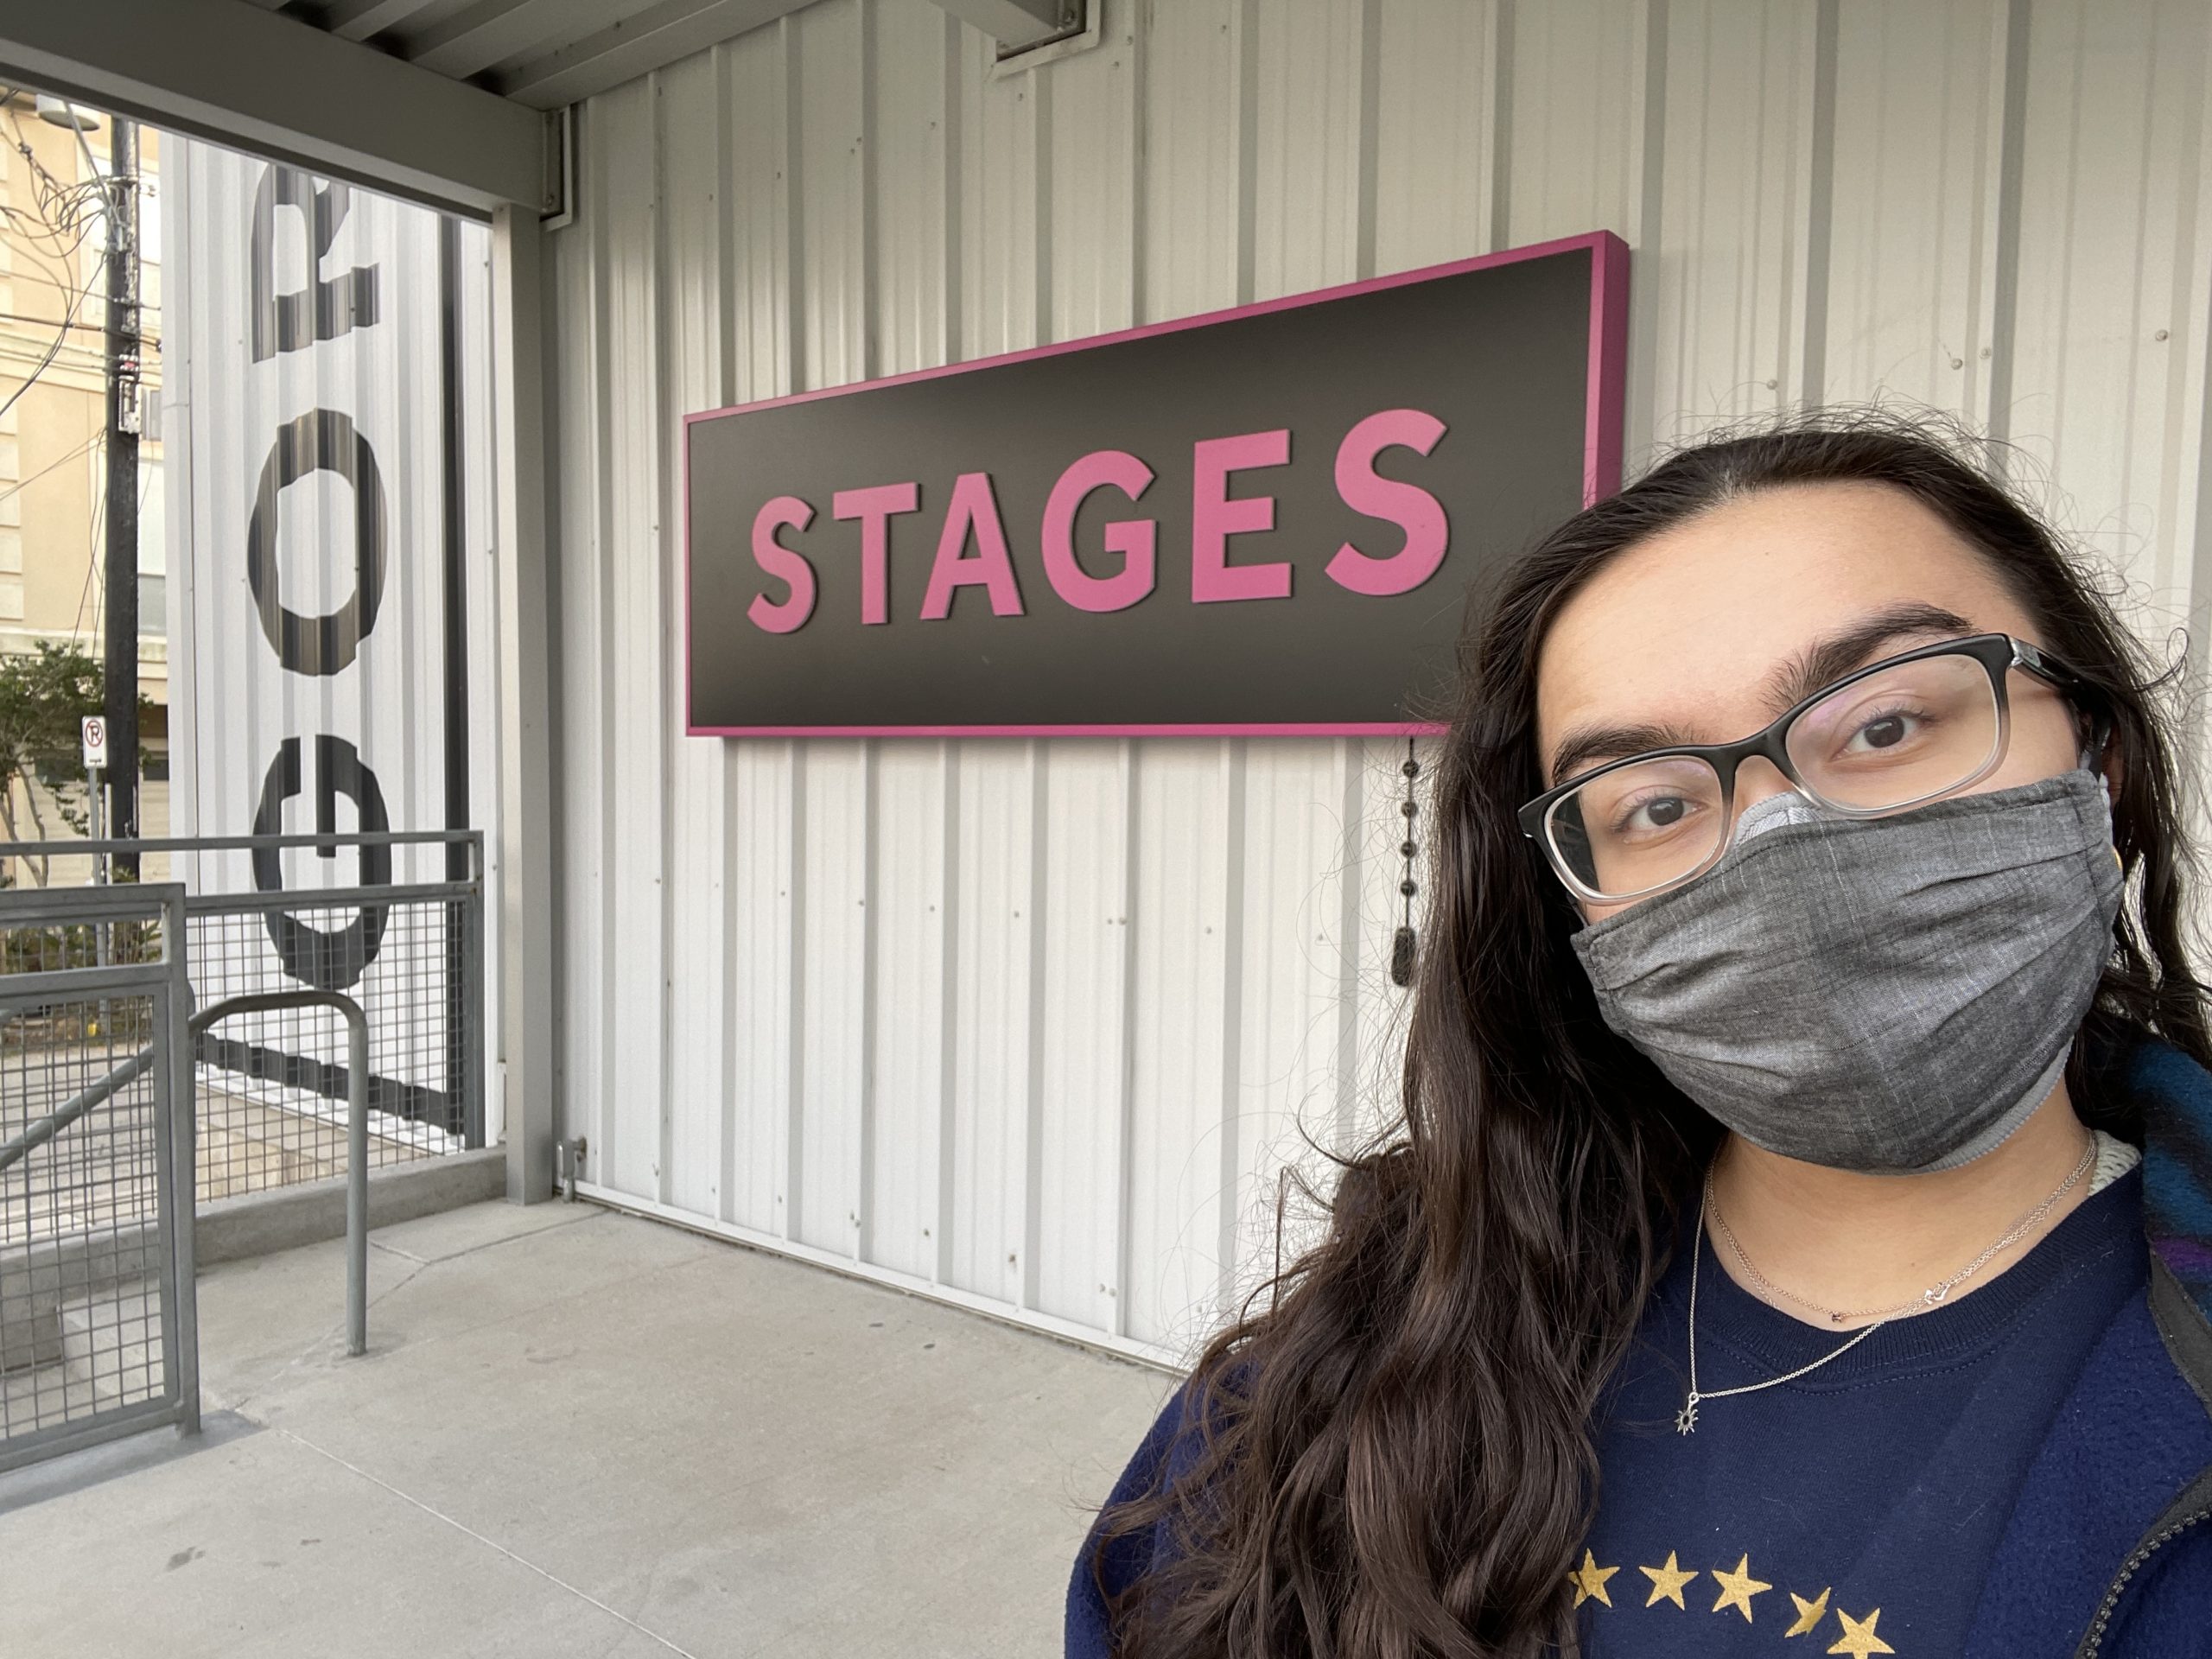 Woman is wearing glasses and a face mask and standing in front of a sign that says "Stages"